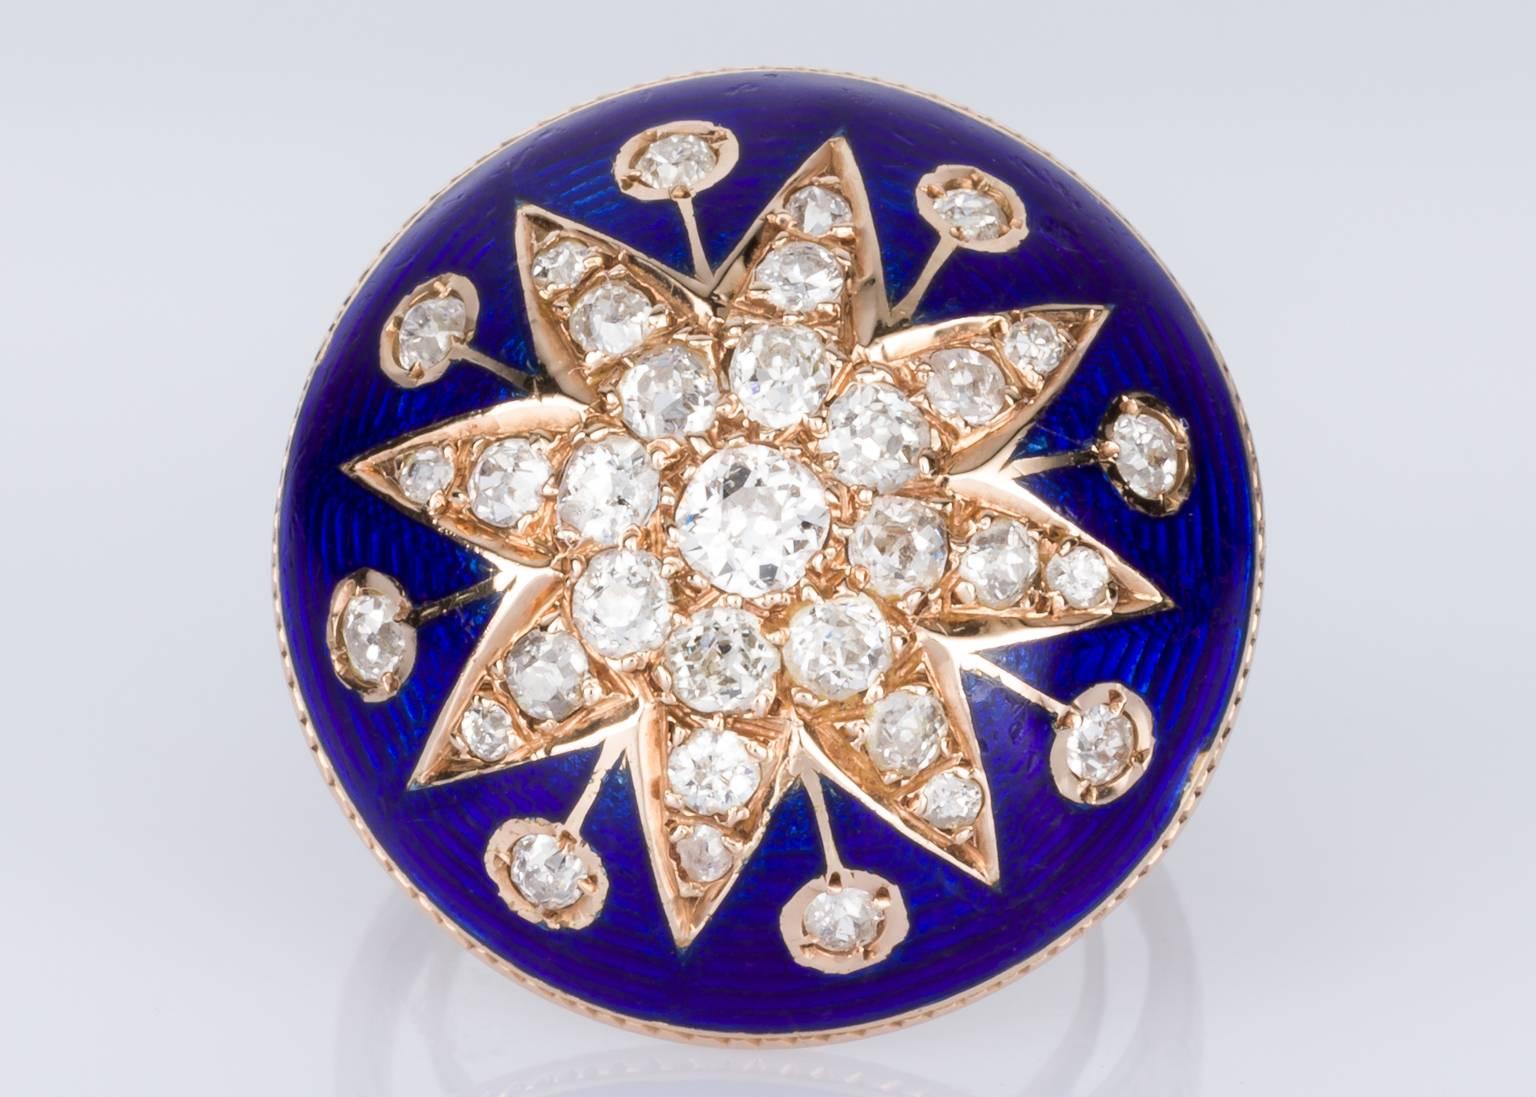 Amazing! This original Victorian star motif ring is an absolute stand-out! A vivid blue enamel ring and this blue is very hard to achieve in enamelling, set with 33 old European cut diamonds weighing approximately 1.20cts in 14k rose gold. So much